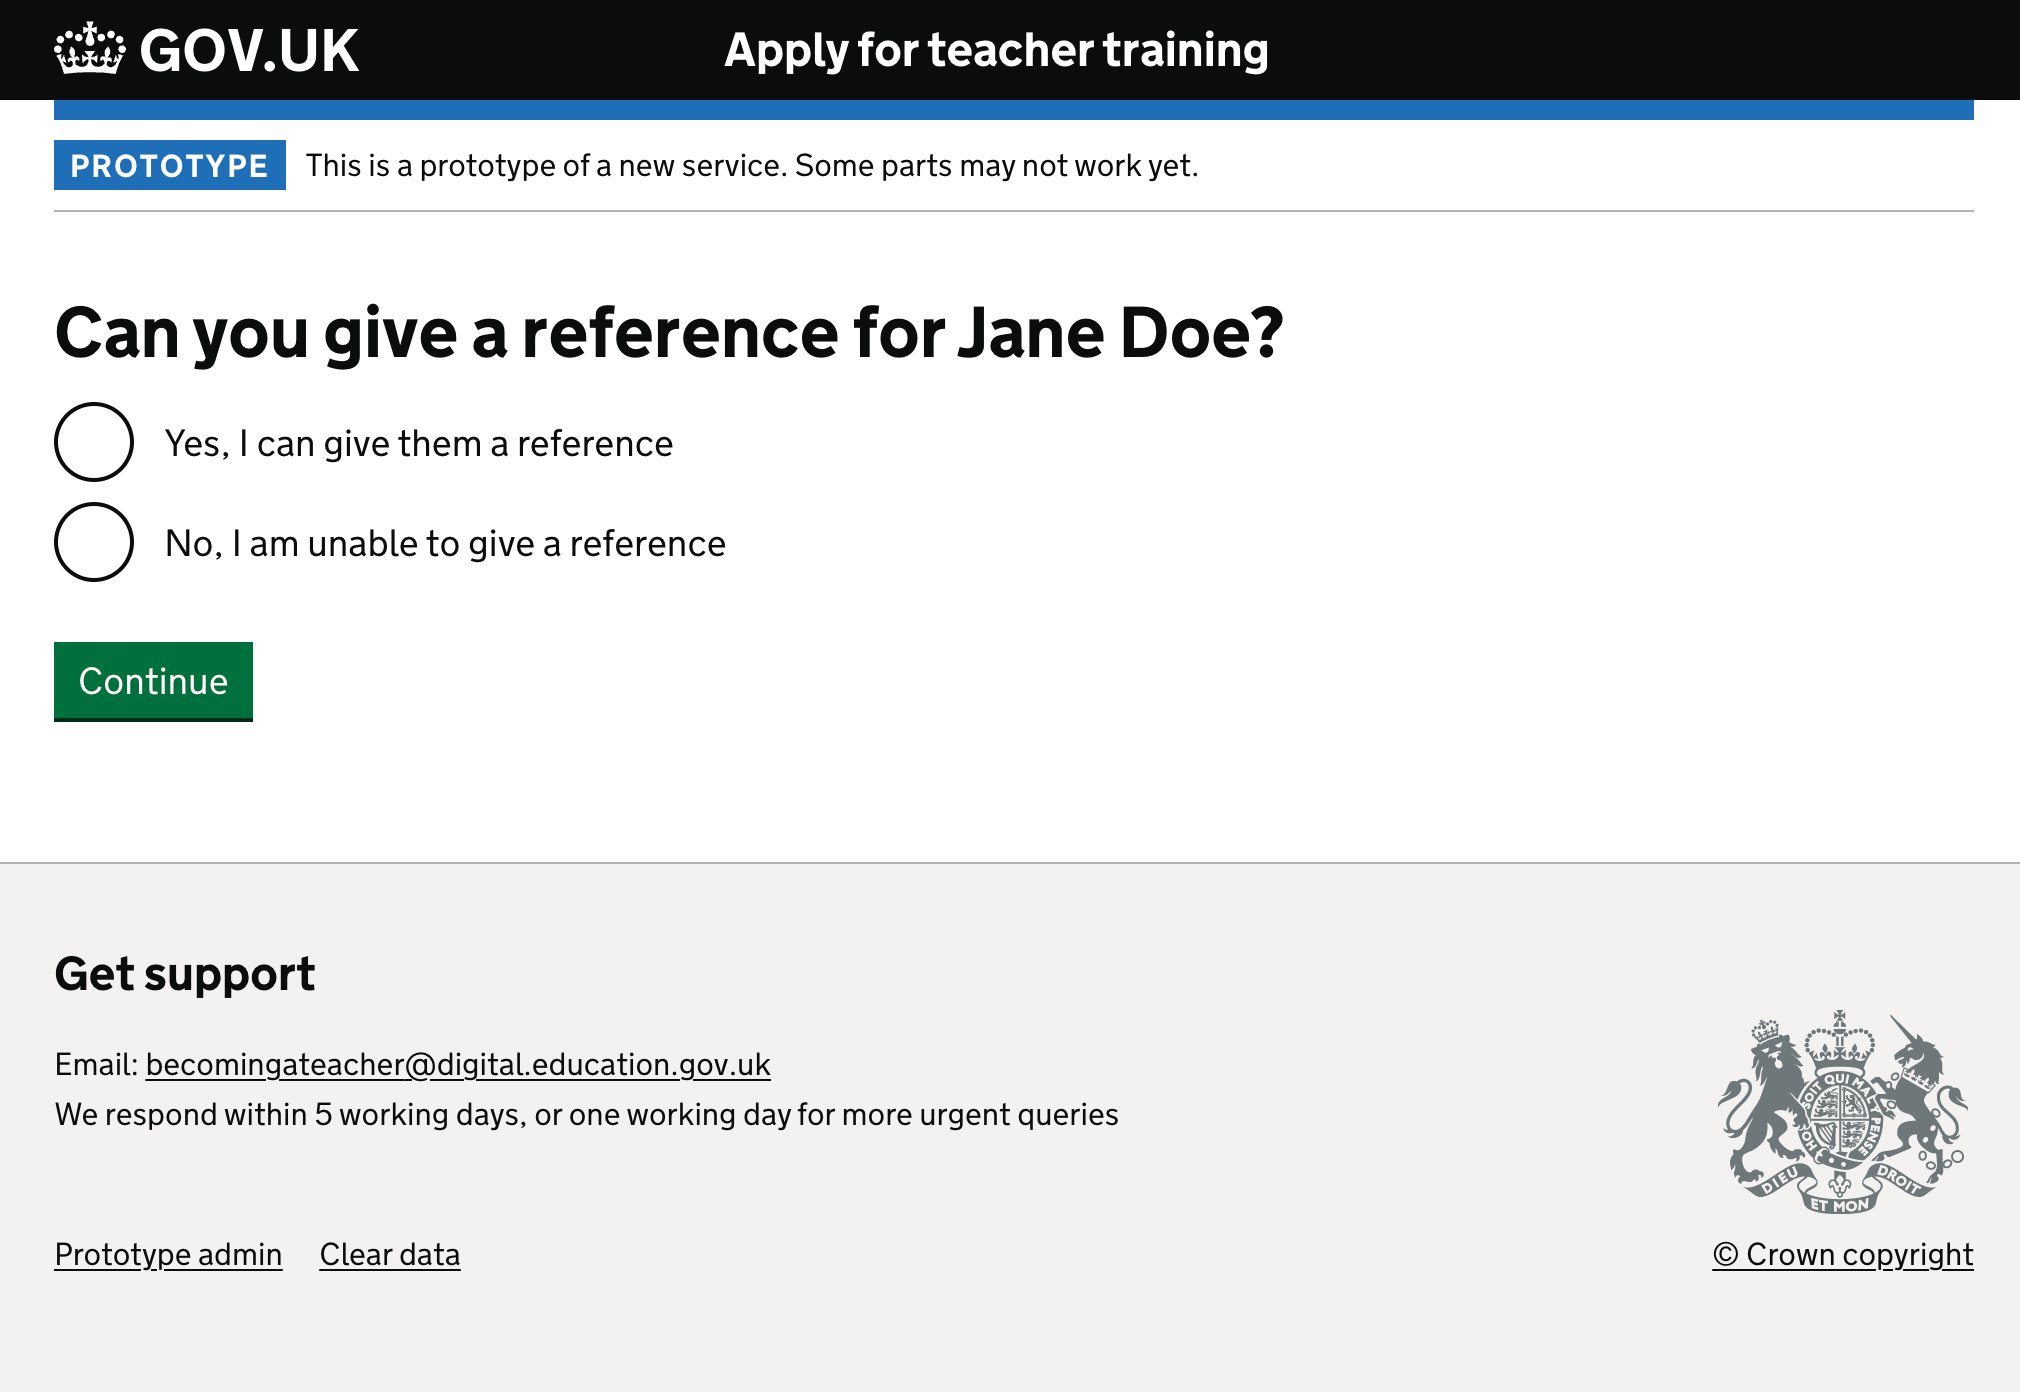 Screenshot showing a page asking ‘Can you give a reference for Jane Doe?’